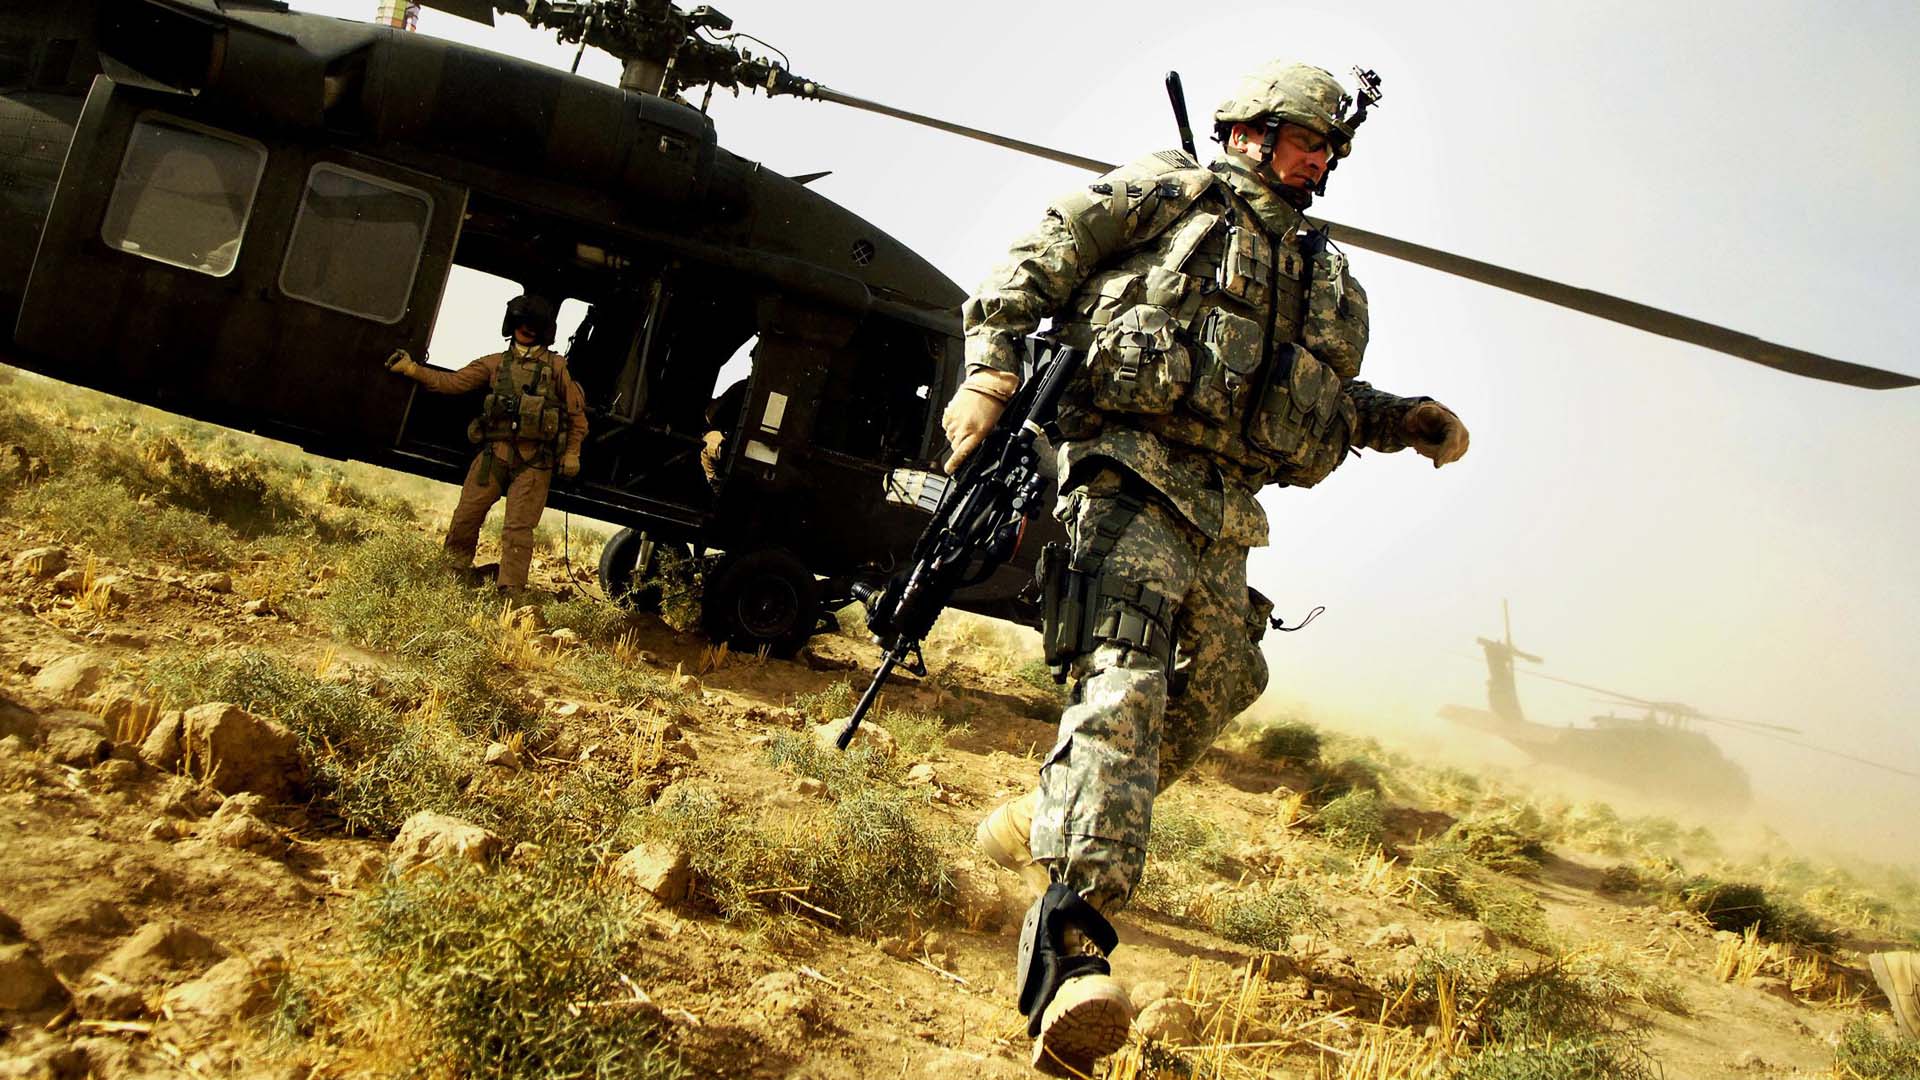 Us Army Soldier Wallpapers Full HD Daily Backgrounds in HD